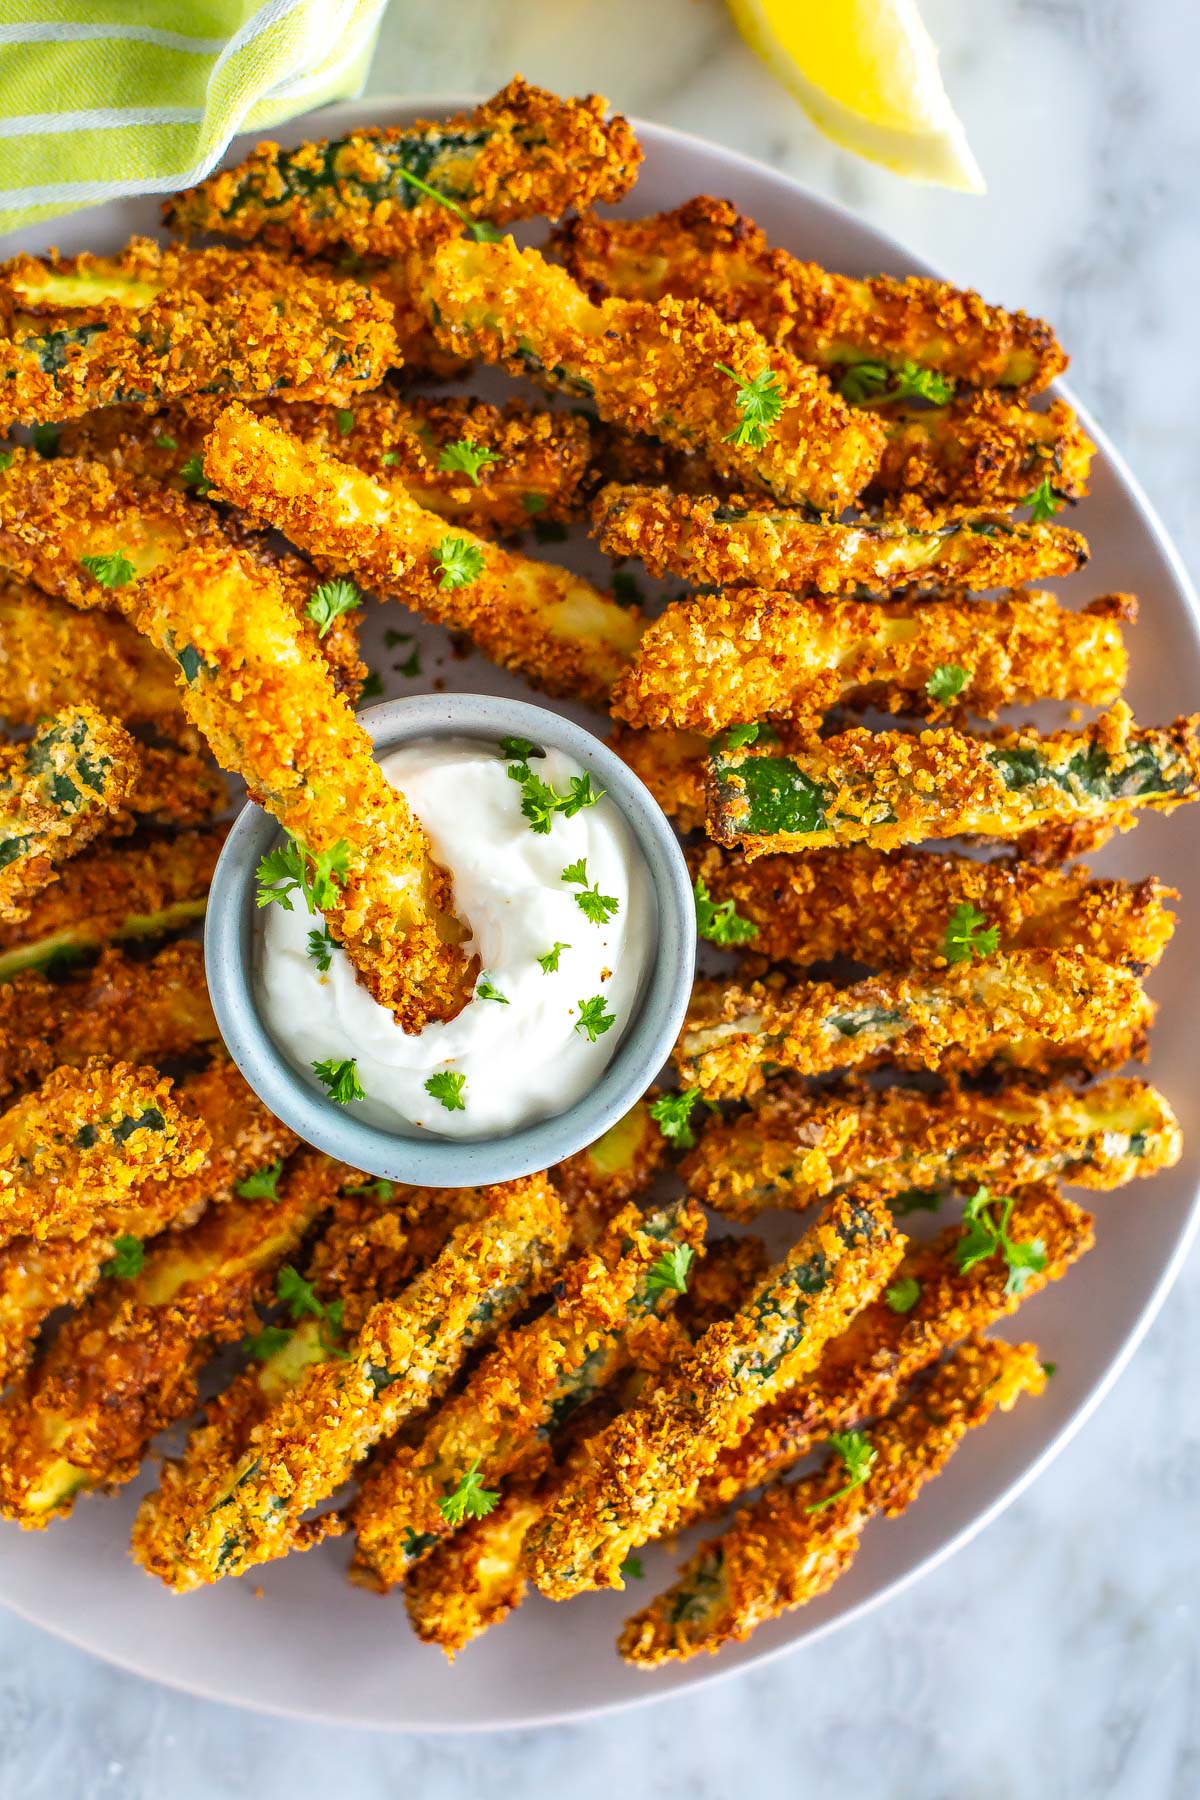 A close-up of a plate of air fryer zucchini fries, with one being dipped in garlic aioli.